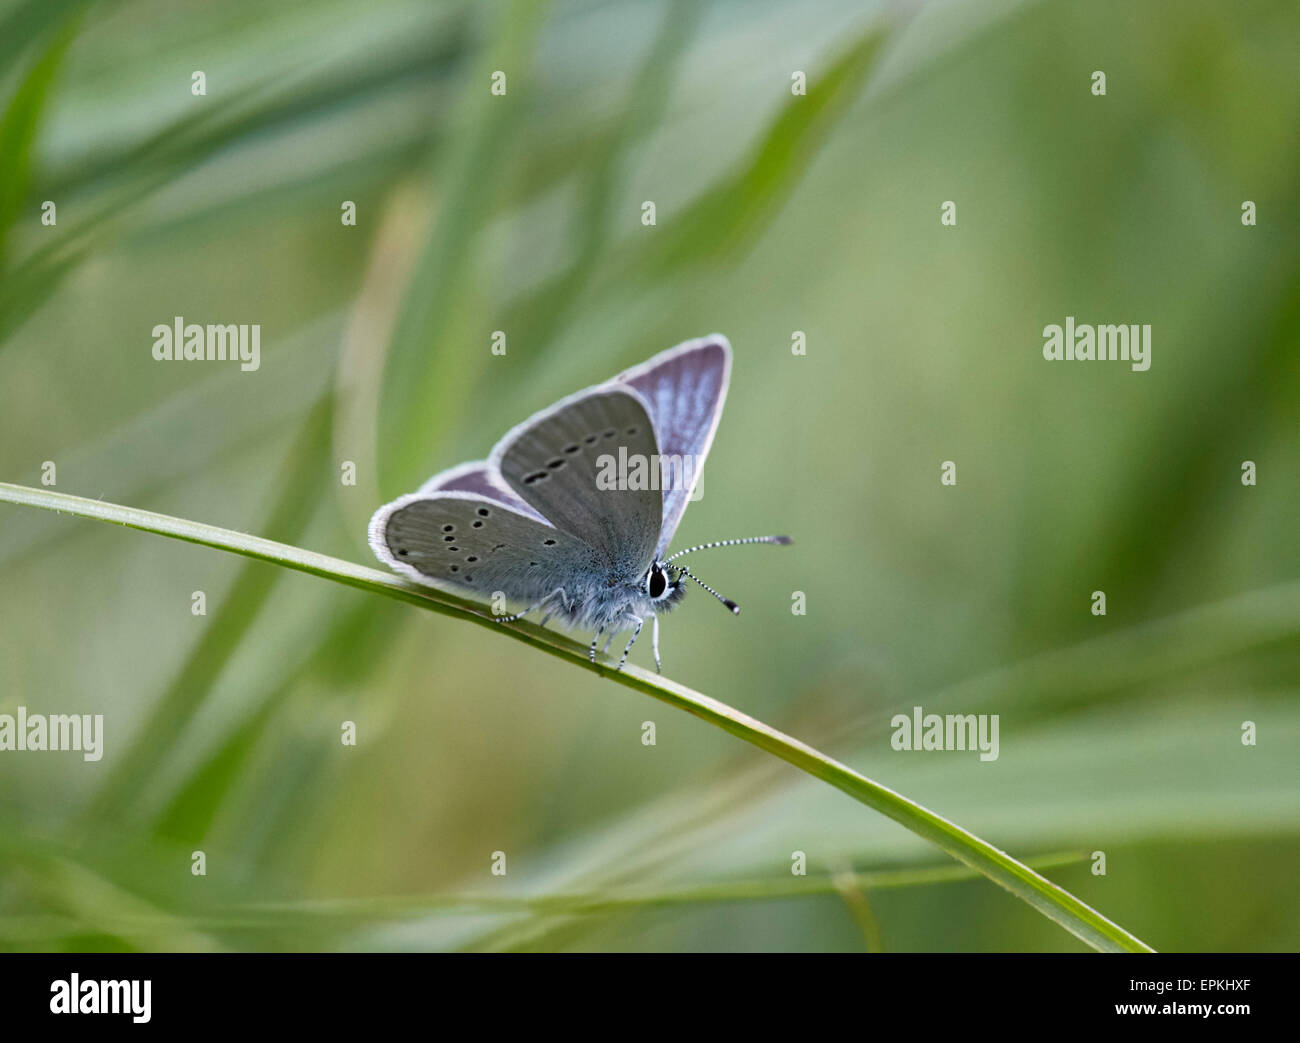 Small Blue resting on grass. Cotley Hill, Heytesbury, Wiltshire, England. Stock Photo